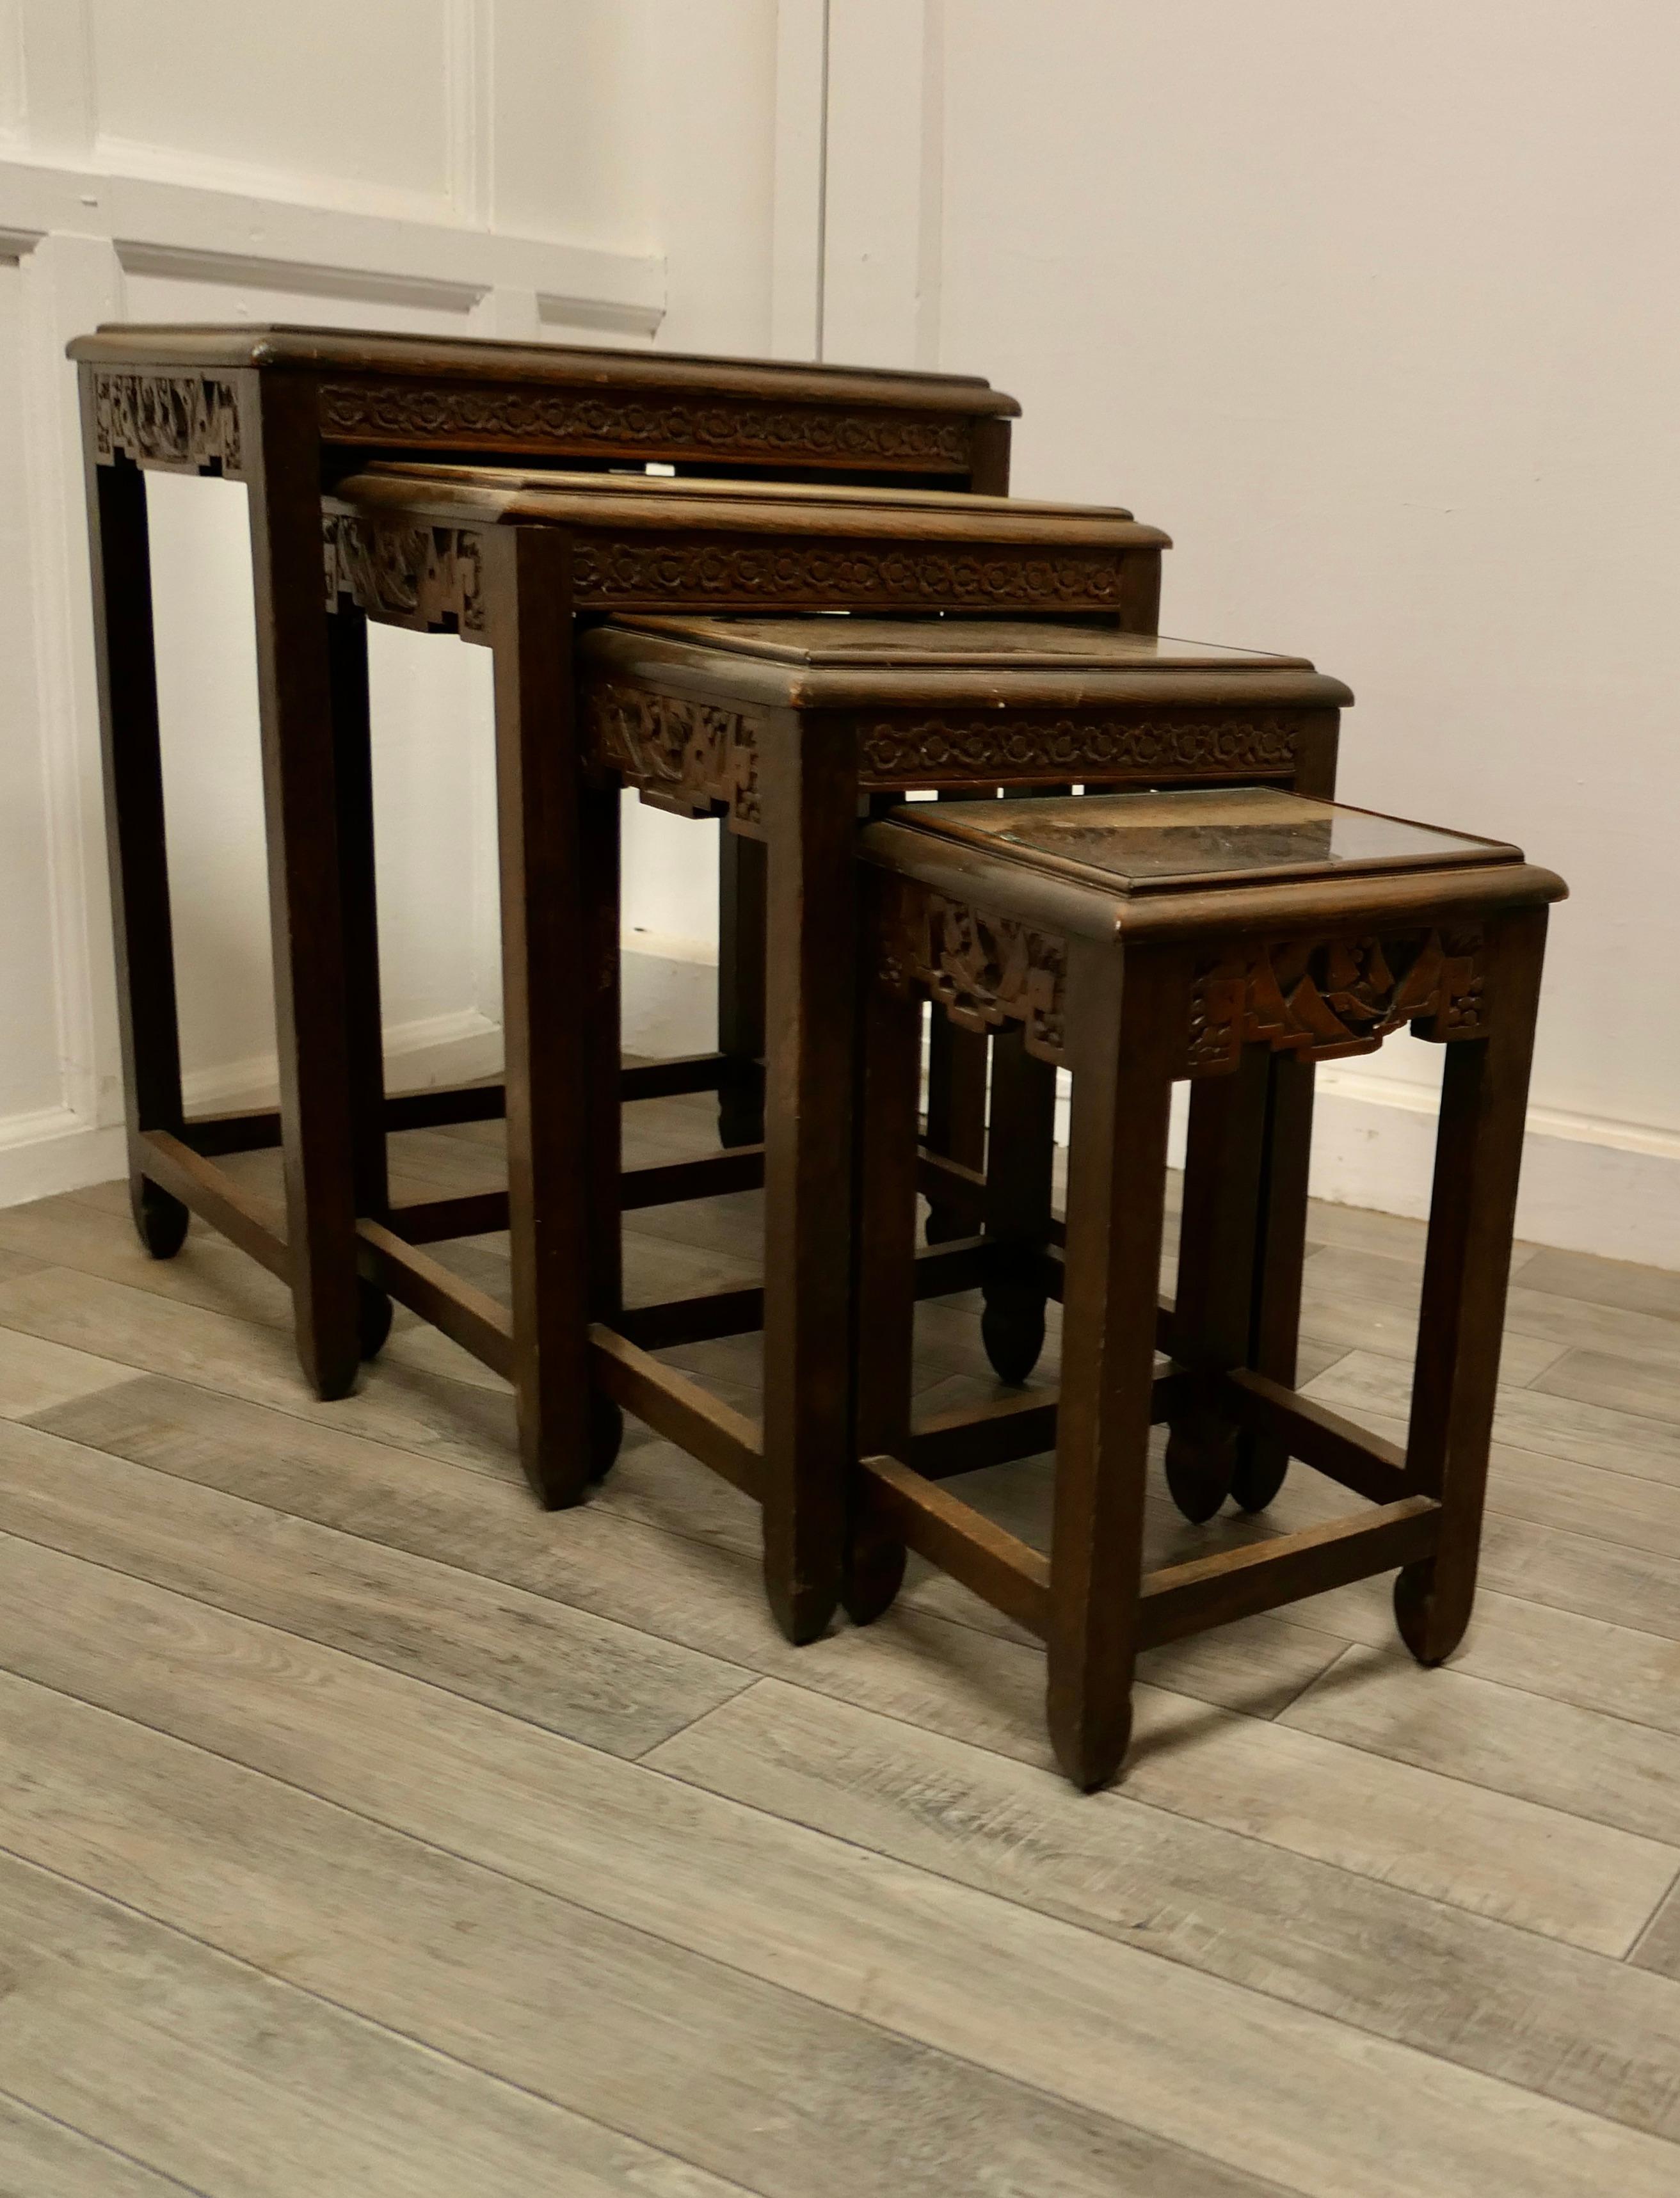 Carved oriental nest of four tables


This is a very Good-looking set of tables, with attractive carved scenes on the top and sides, all 4 tables are sound and in good condition they have inset glass tops which have kept them looking good
As